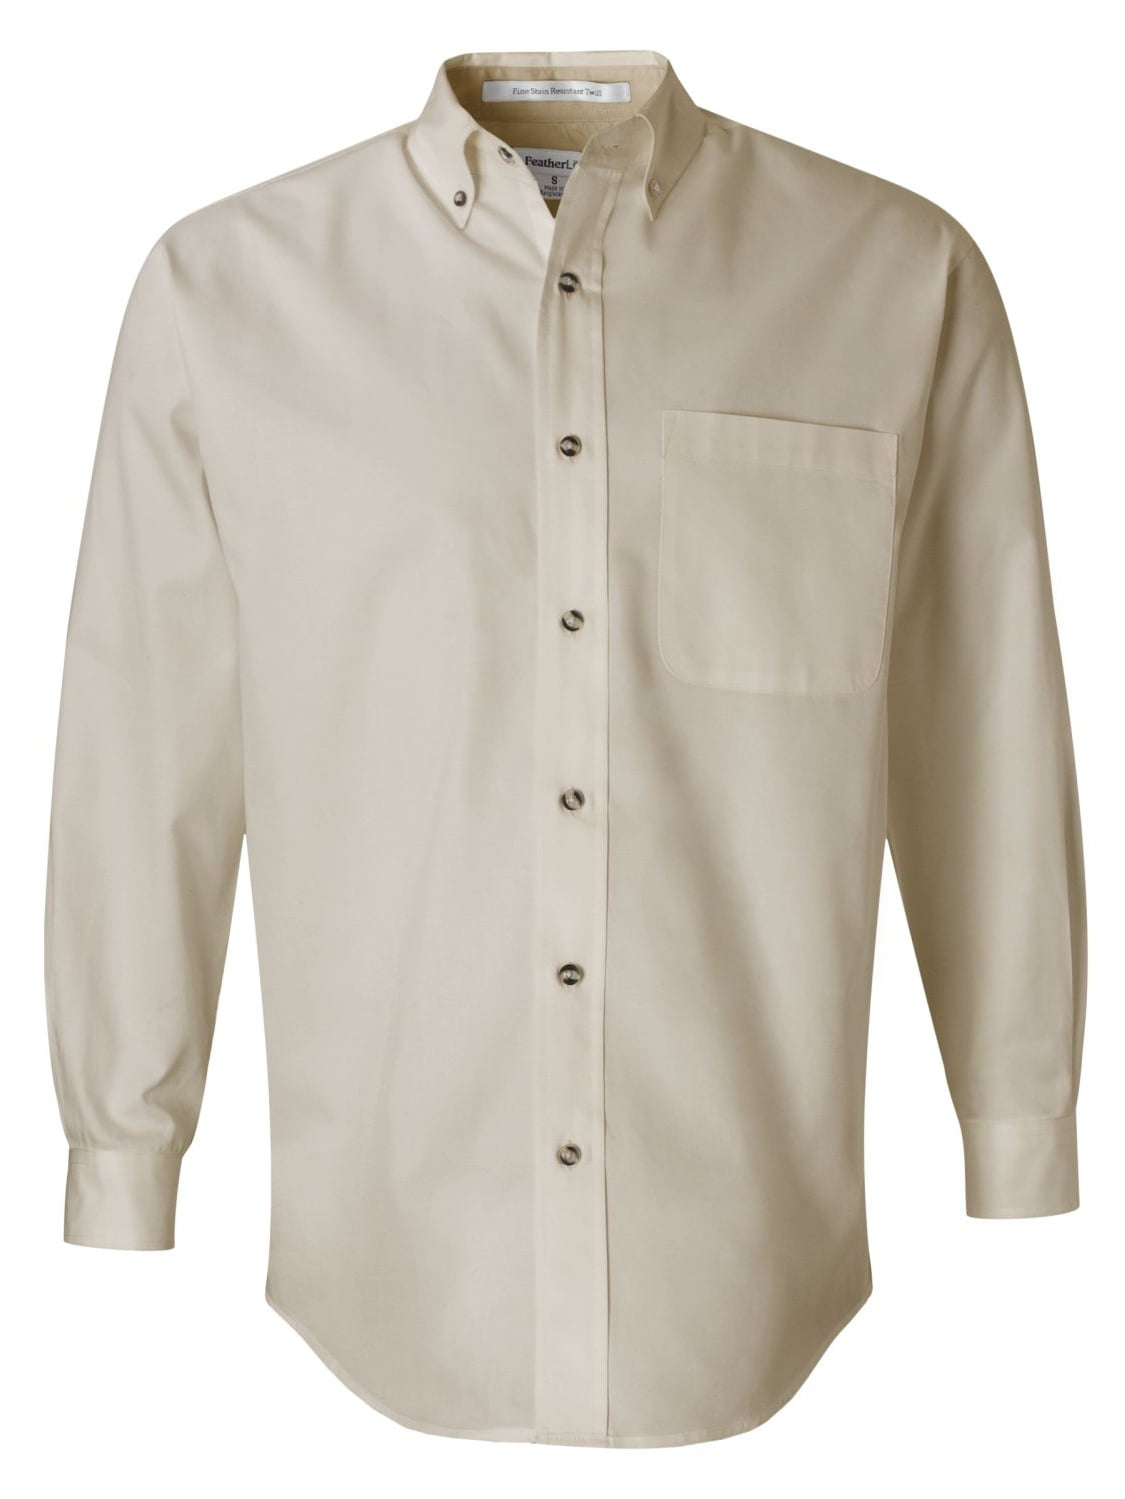 Featherlite - FeatherLite 3281 Long Sleeve Stain-Resistant Twill Shirt ...